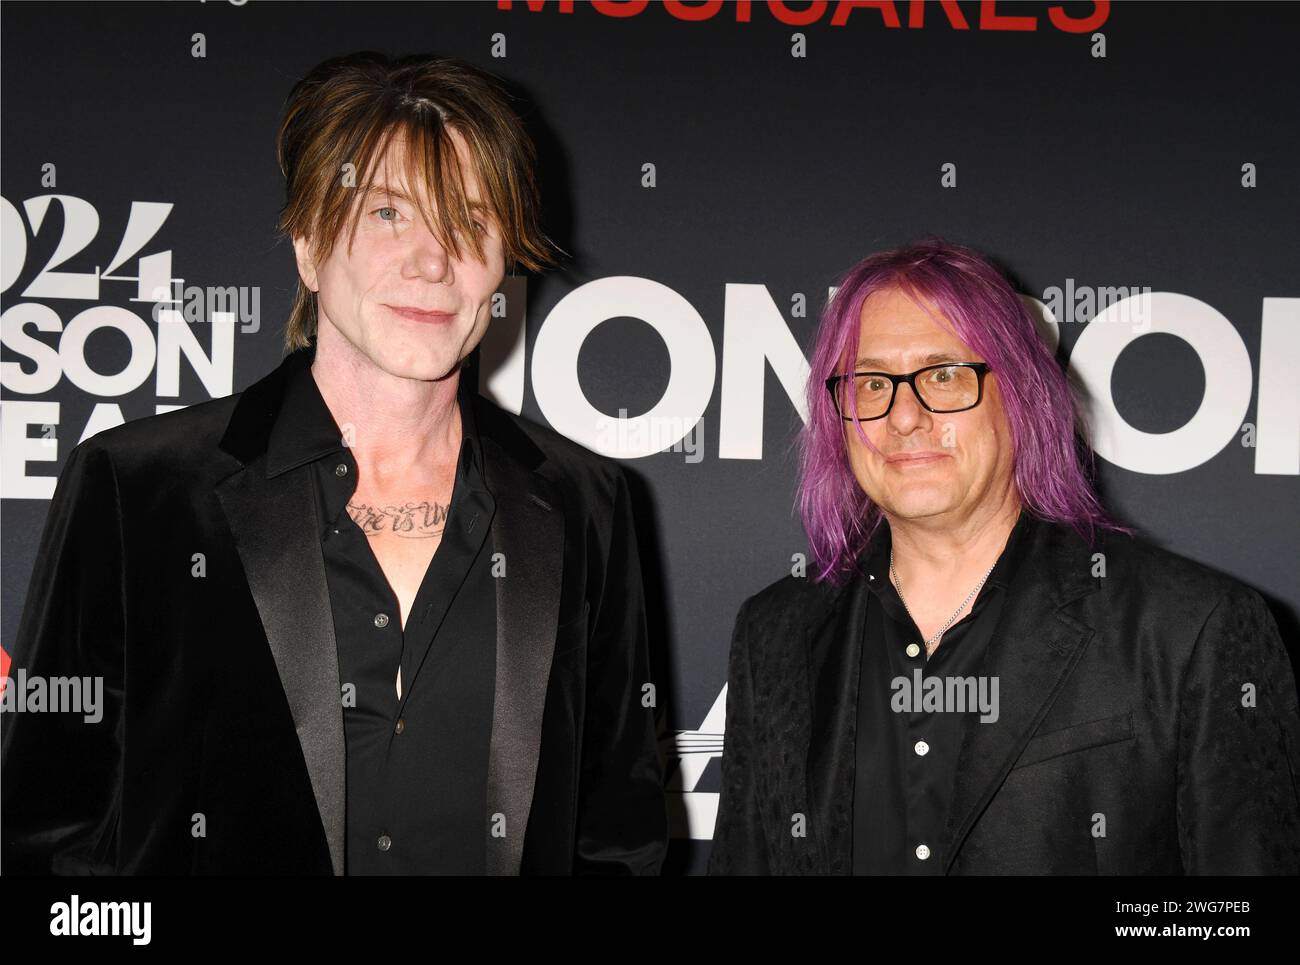 LOS ANGELES, CALIFORNIA - FEBRUARY 02: (L-R) John Rzeznik and Robby Takac of the Goo Goo Dolls attend the 2024 MusiCares Person of the Year Honoring J Stock Photo